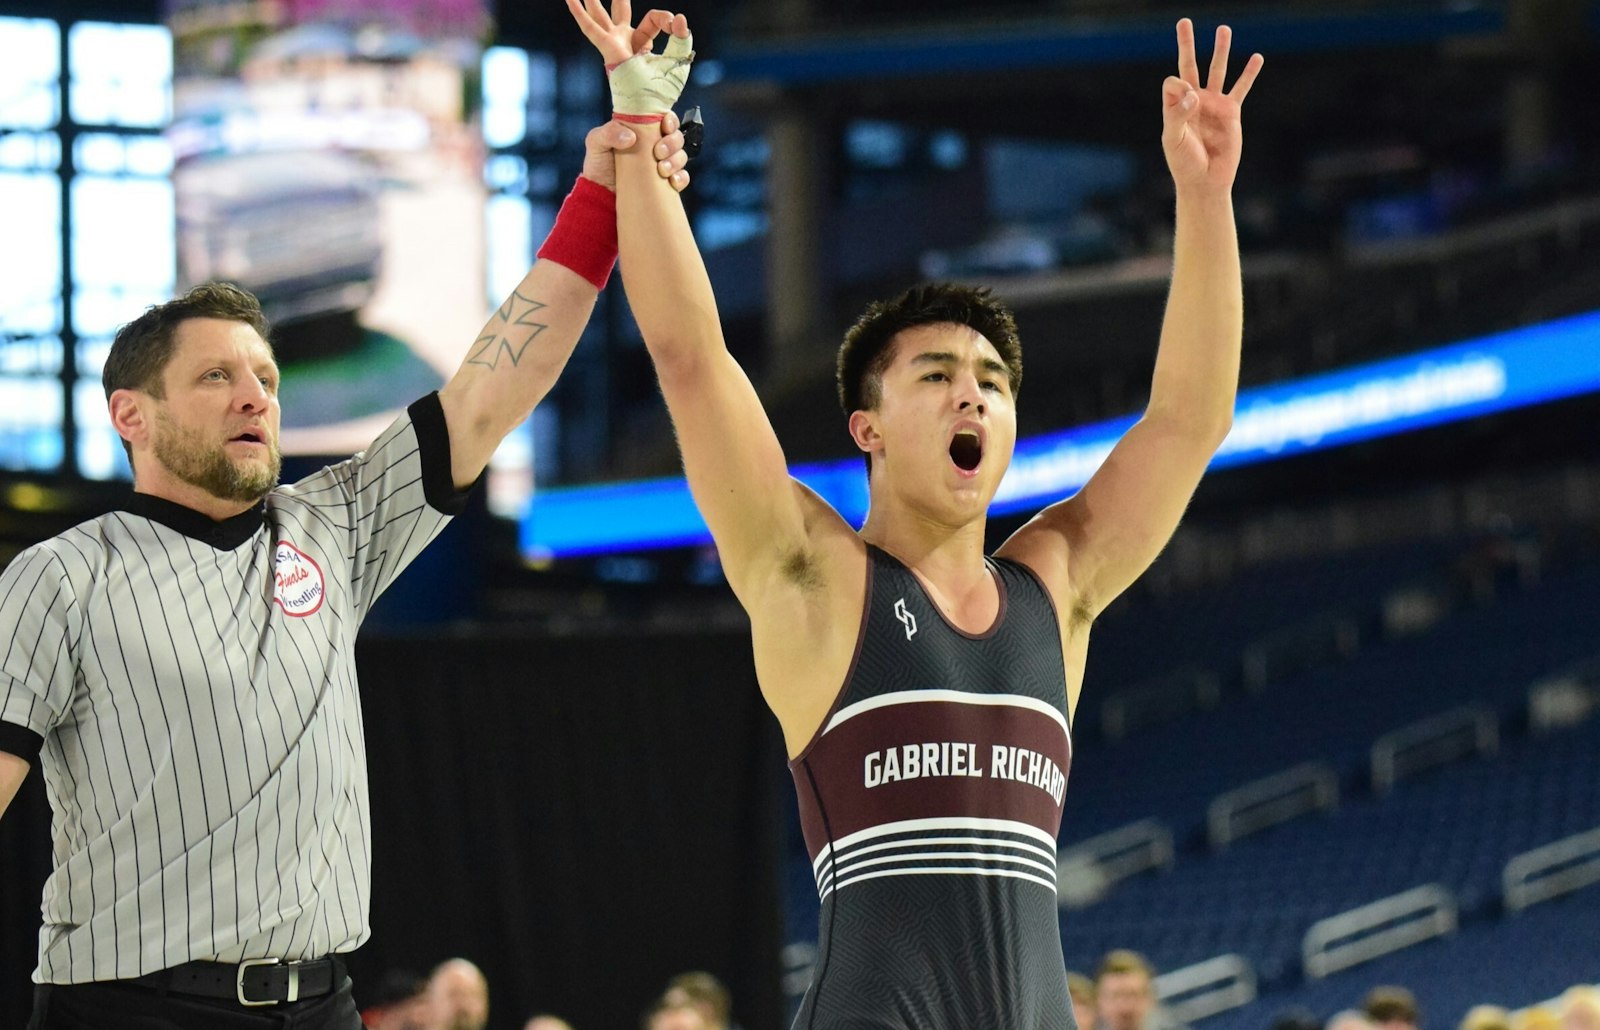 Sebastian Martinez will have to wait a year to try for his fourth individual title in a row after winning his third state individual wrestling championship. The junior at Riverview Gabriel Richard issued a challenge: “I am starting a new legacy.” (Photo courtesy of Alexander Muller/News-Herald)